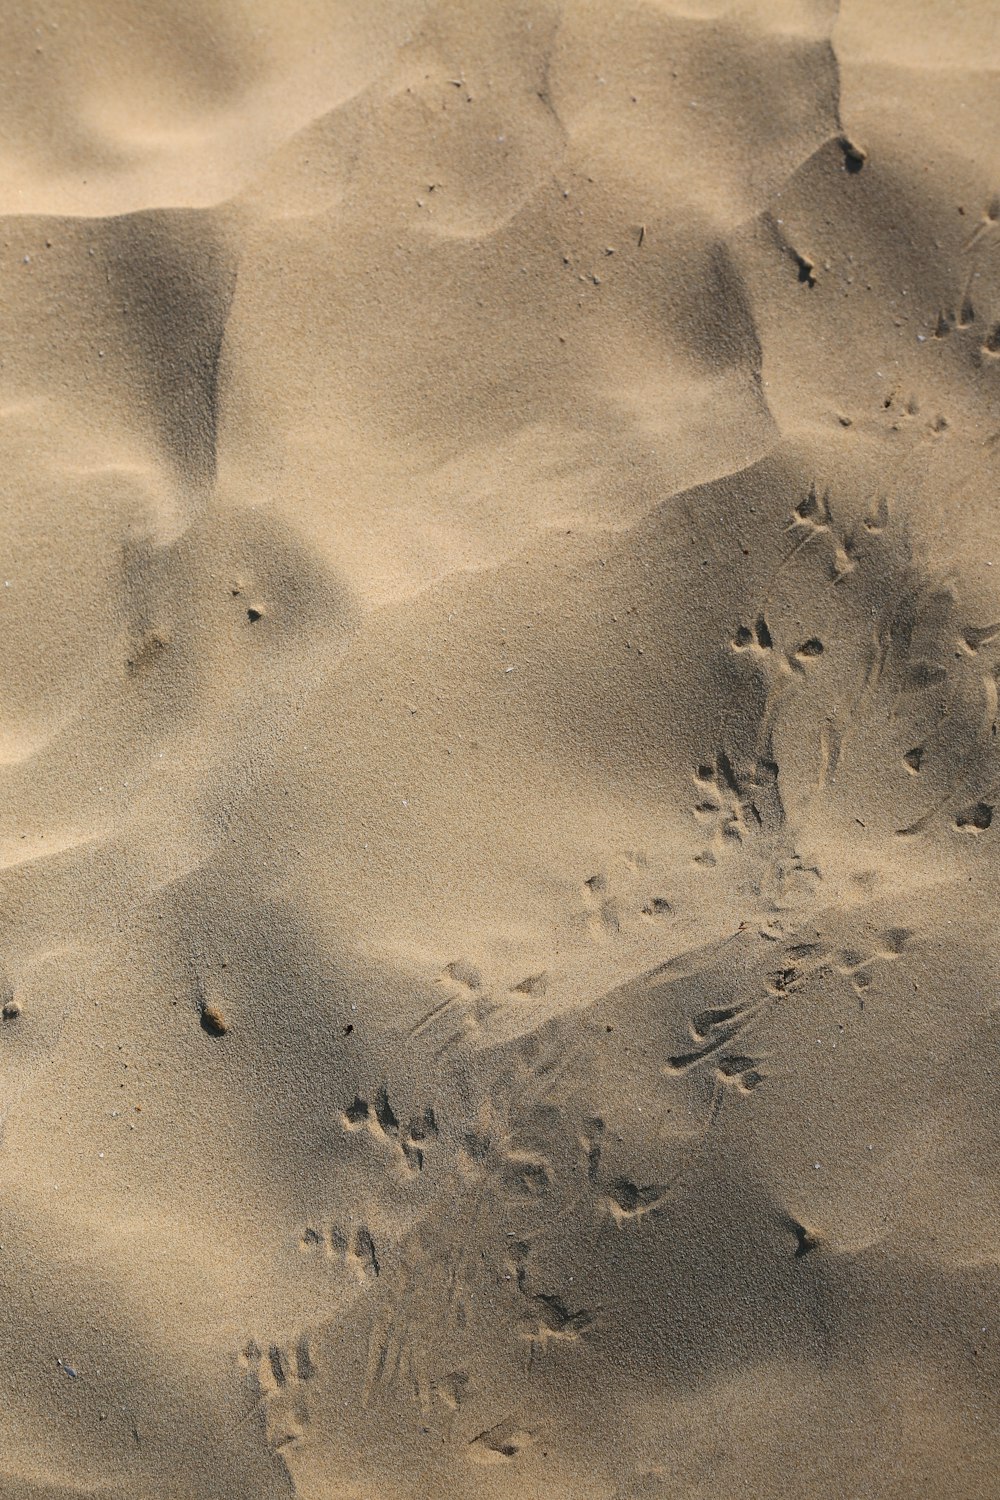 footprints in the sand of a beach